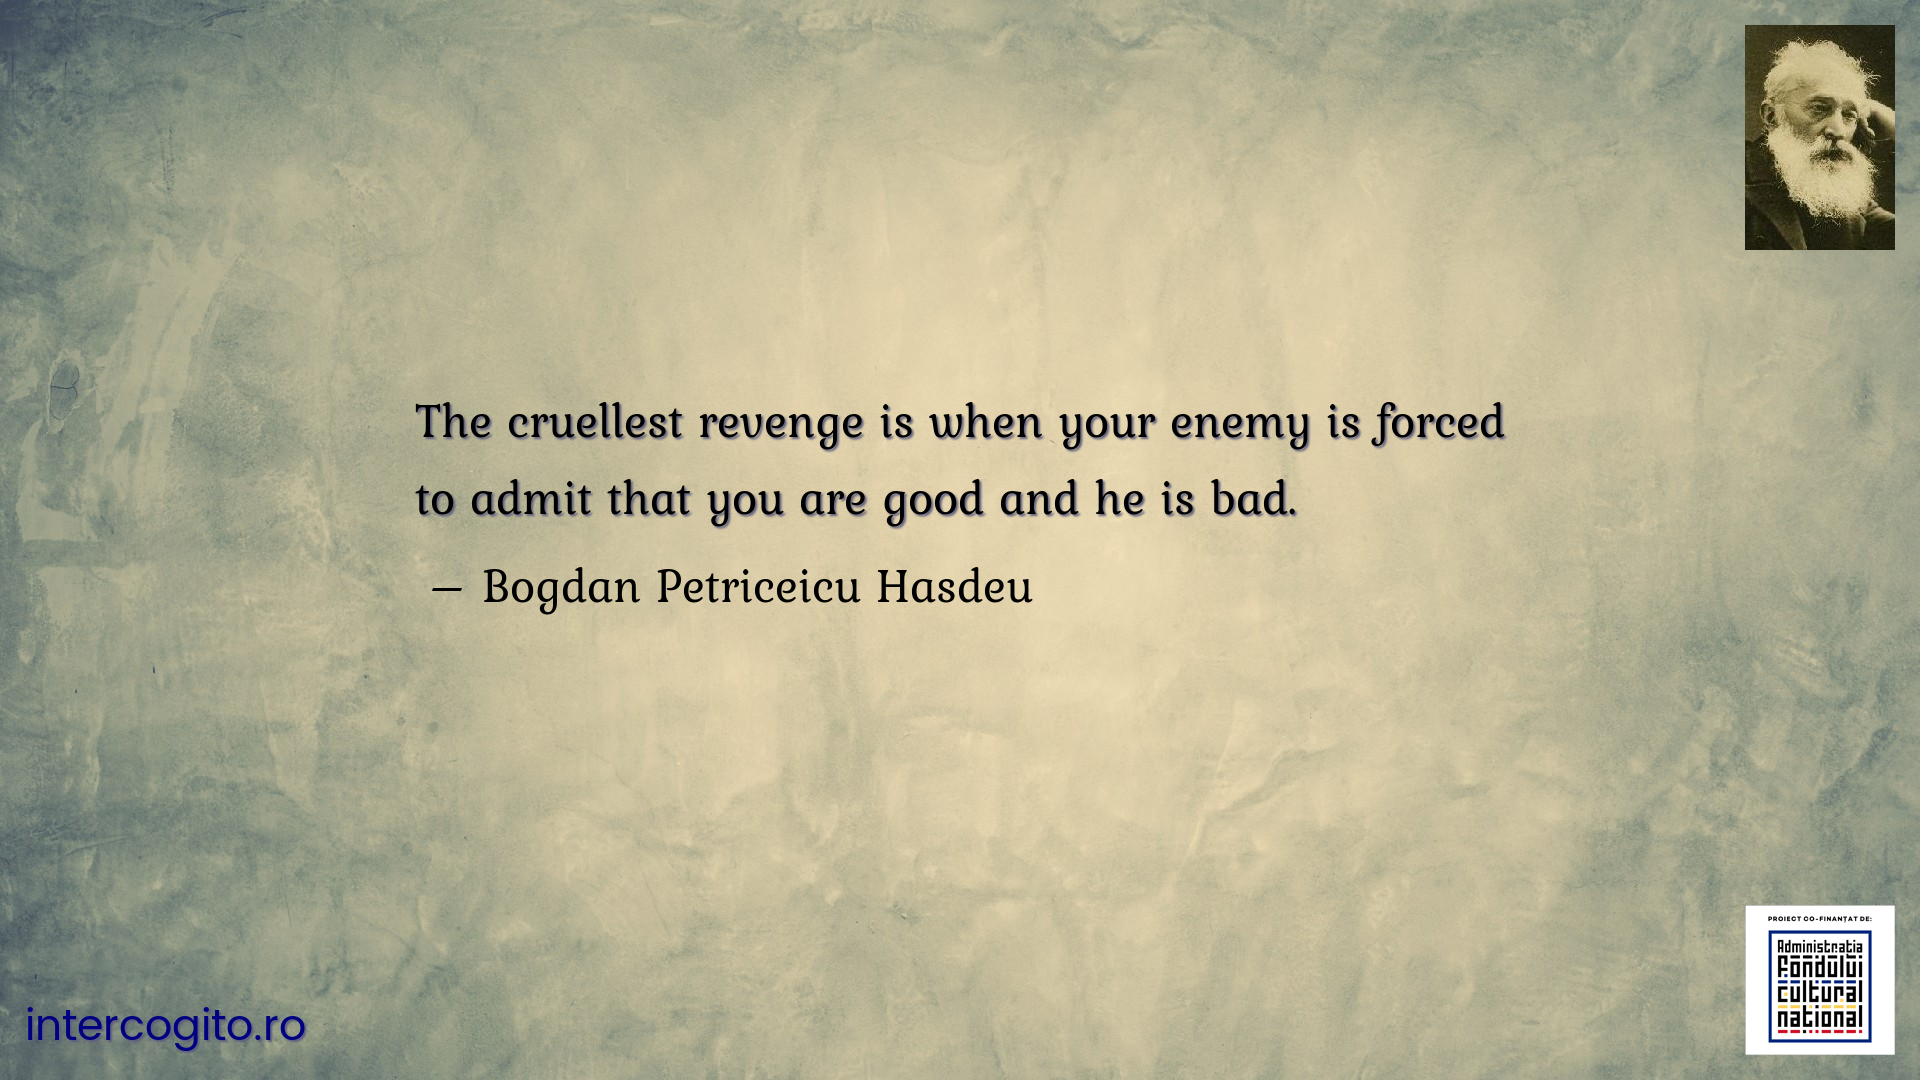 The cruellest revenge is when your enemy is forced to admit that you are good and he is bad.